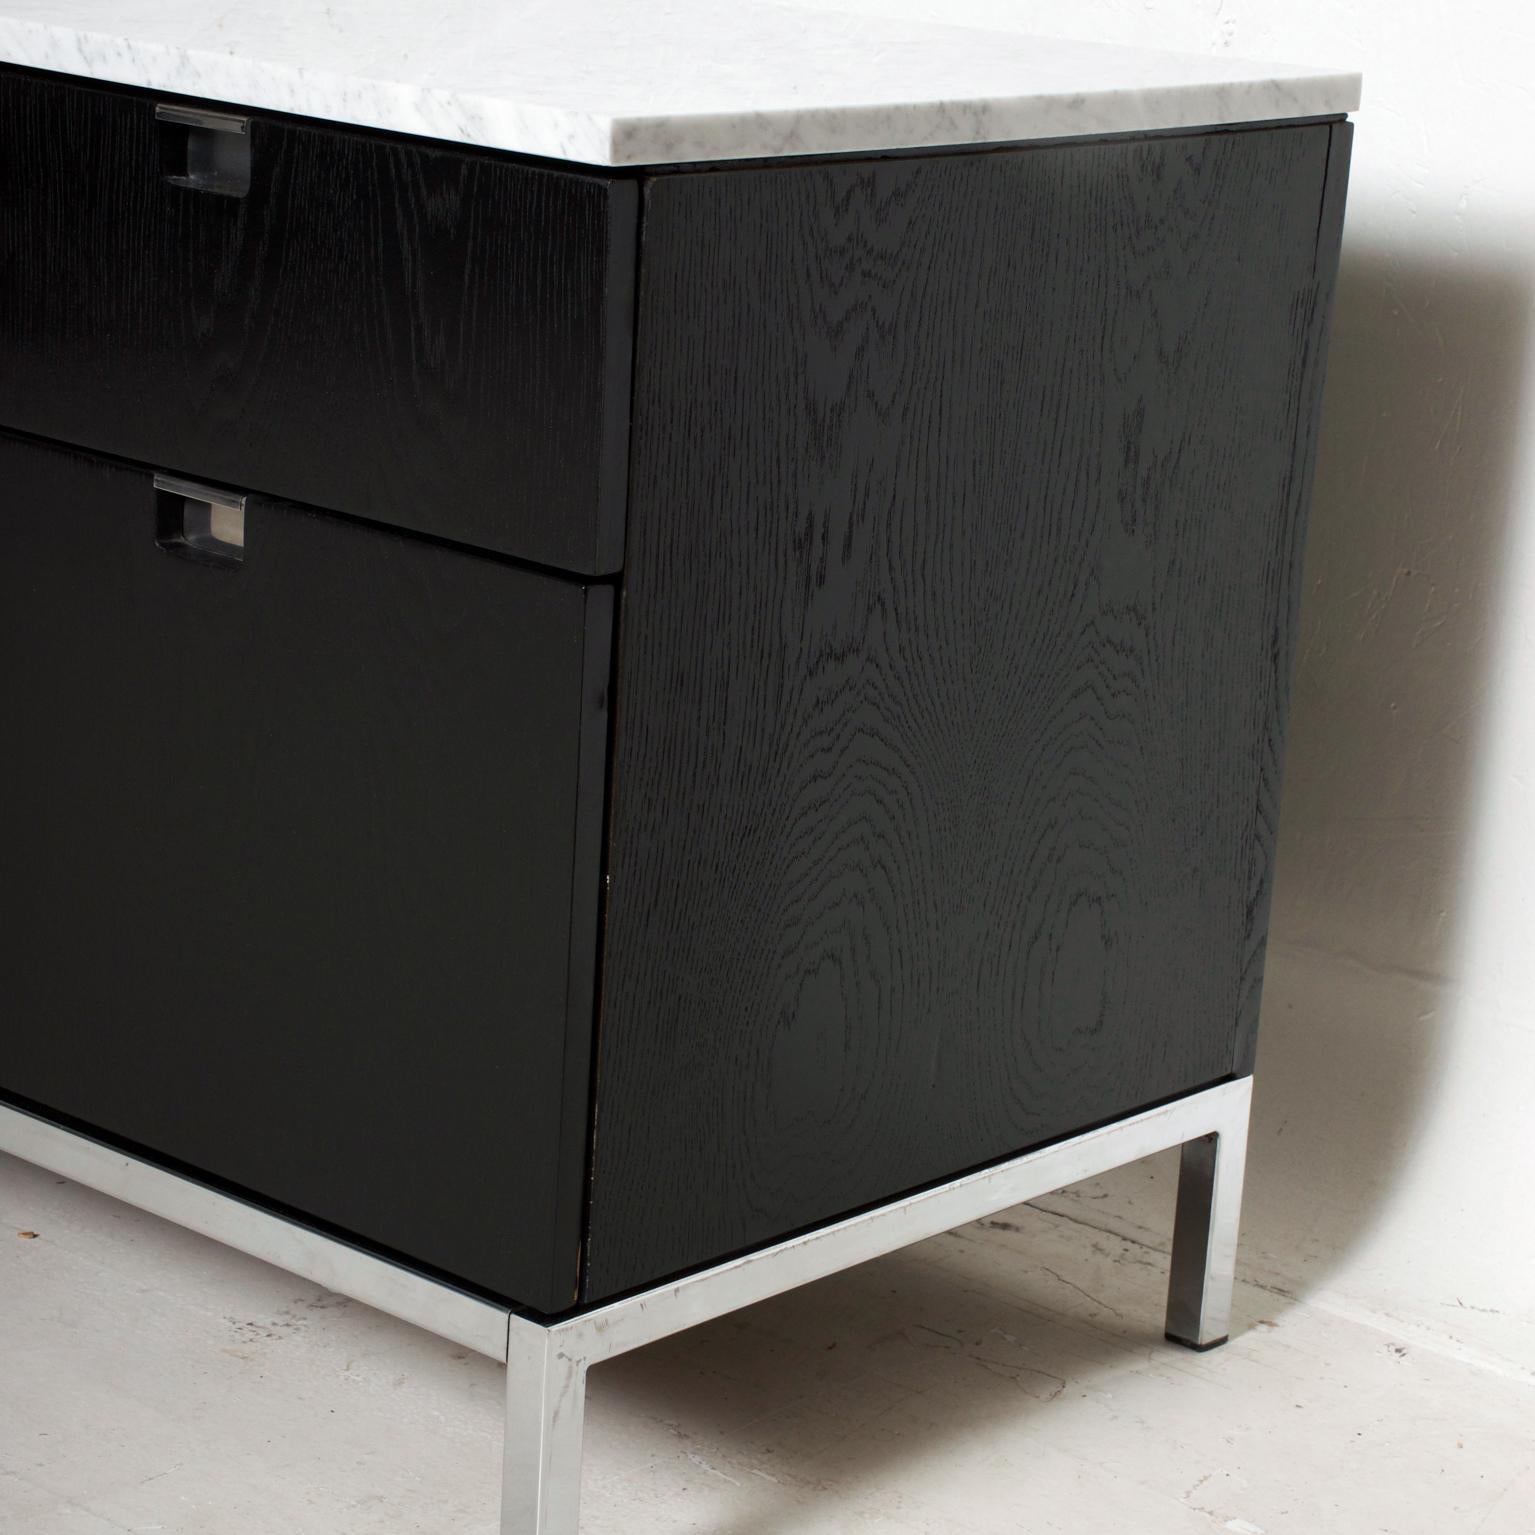 Painted Fabulous Florence Knoll Black Oak Credenza Cabinet in White Carrera Marble 1960s